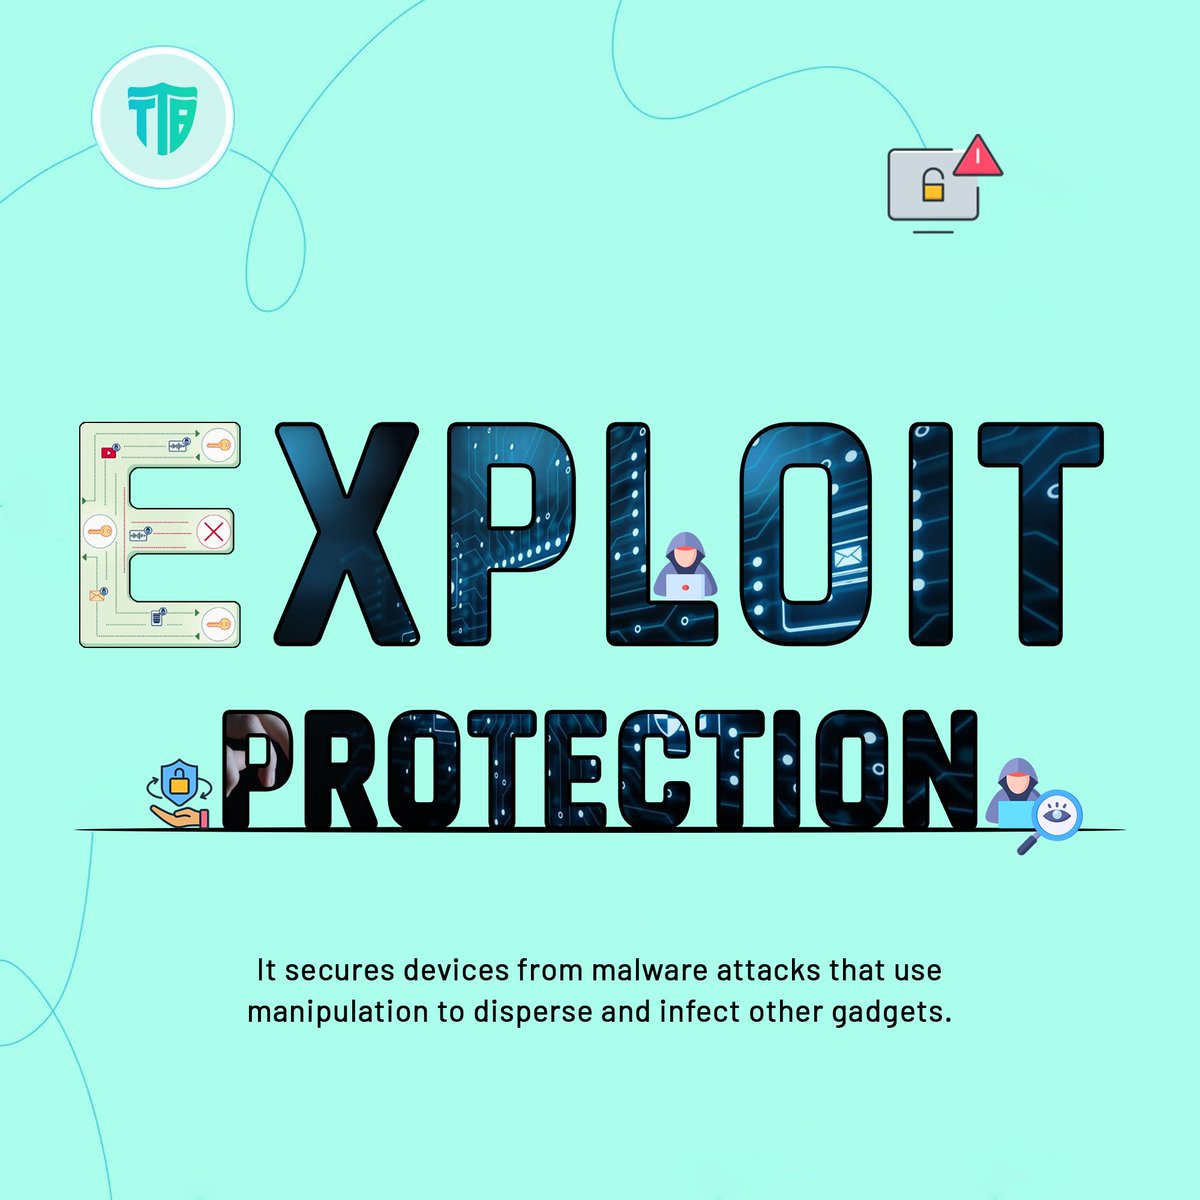 Today we discuss about 'Exploit Protection'

It guards devices from malware invasions that use manipulation to spread and infect other gadgets.

#Vulnerability #PatchManagement #ttb #NetworkSecurity #CyberDefense #RiskMitigation #ThreatIntelligence #DataPrivacy #ttbisecure